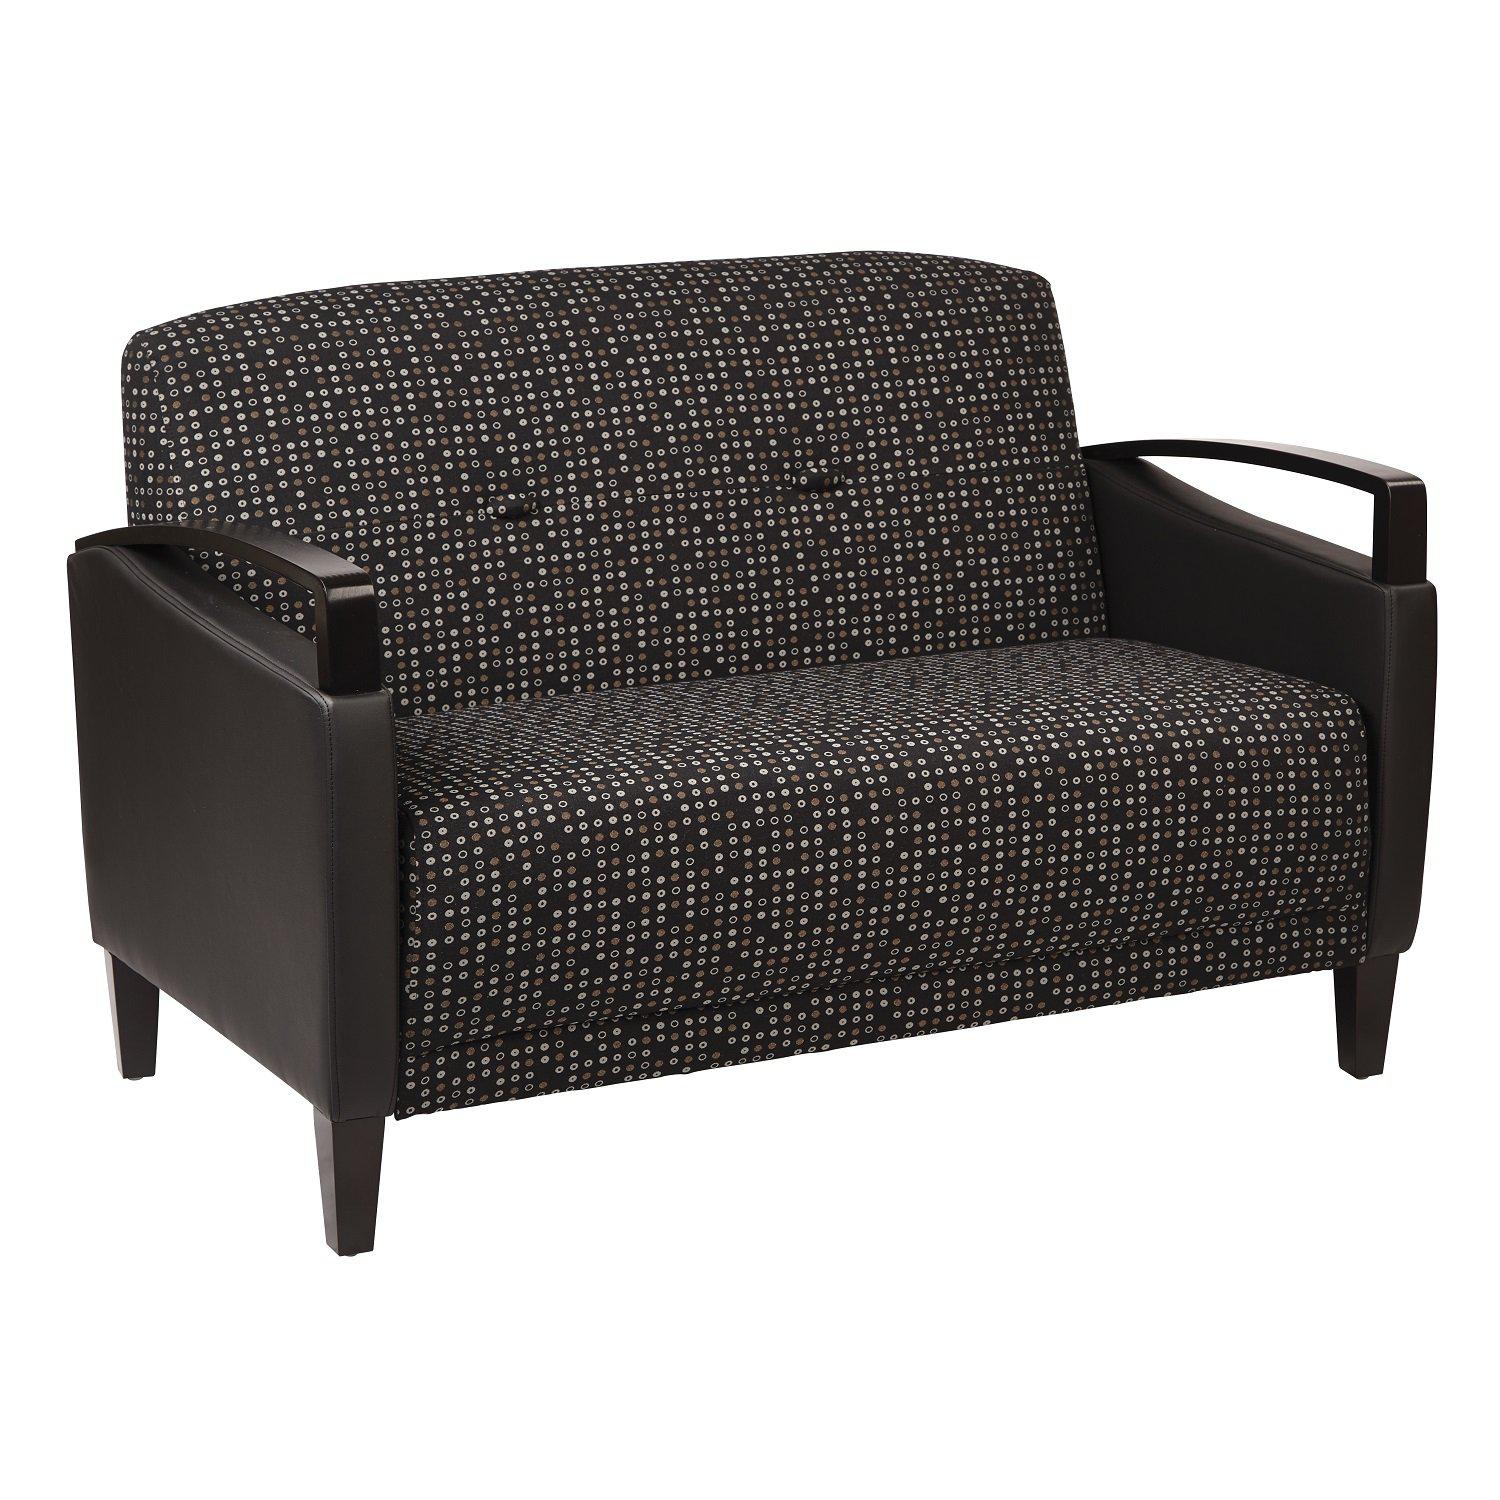 Main Street Loveseat with Espresso Finish and 2-Tone Upholstery